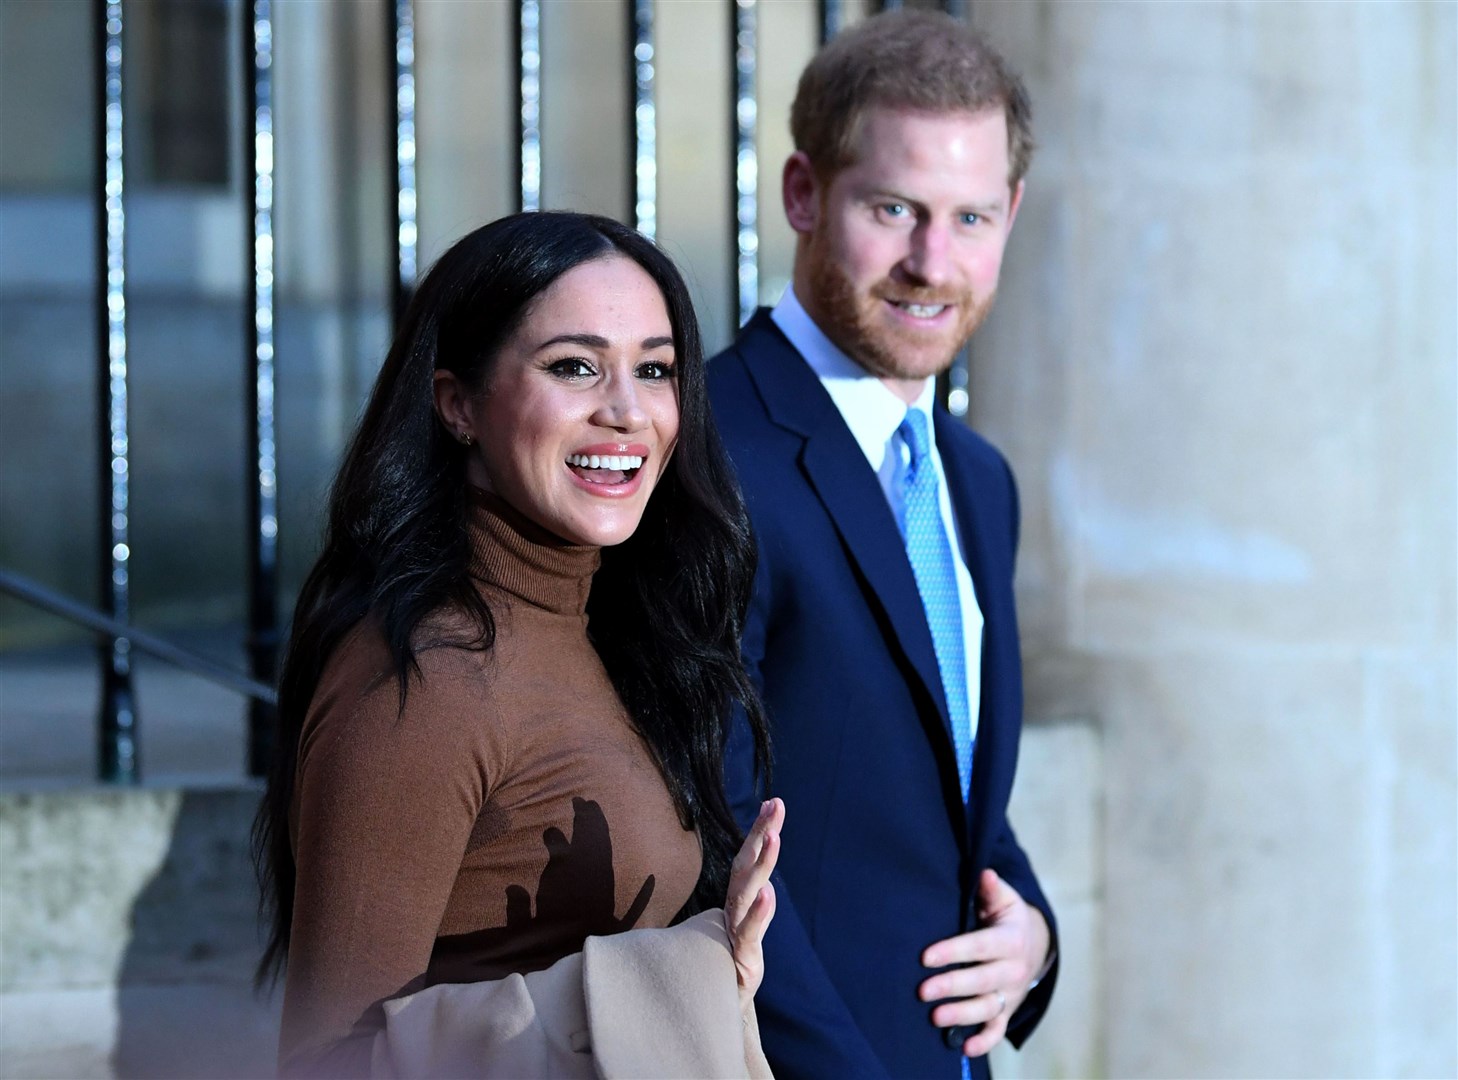 The Duke and Duchess of Sussex (Daniel Leal-Olivas/PA Images)